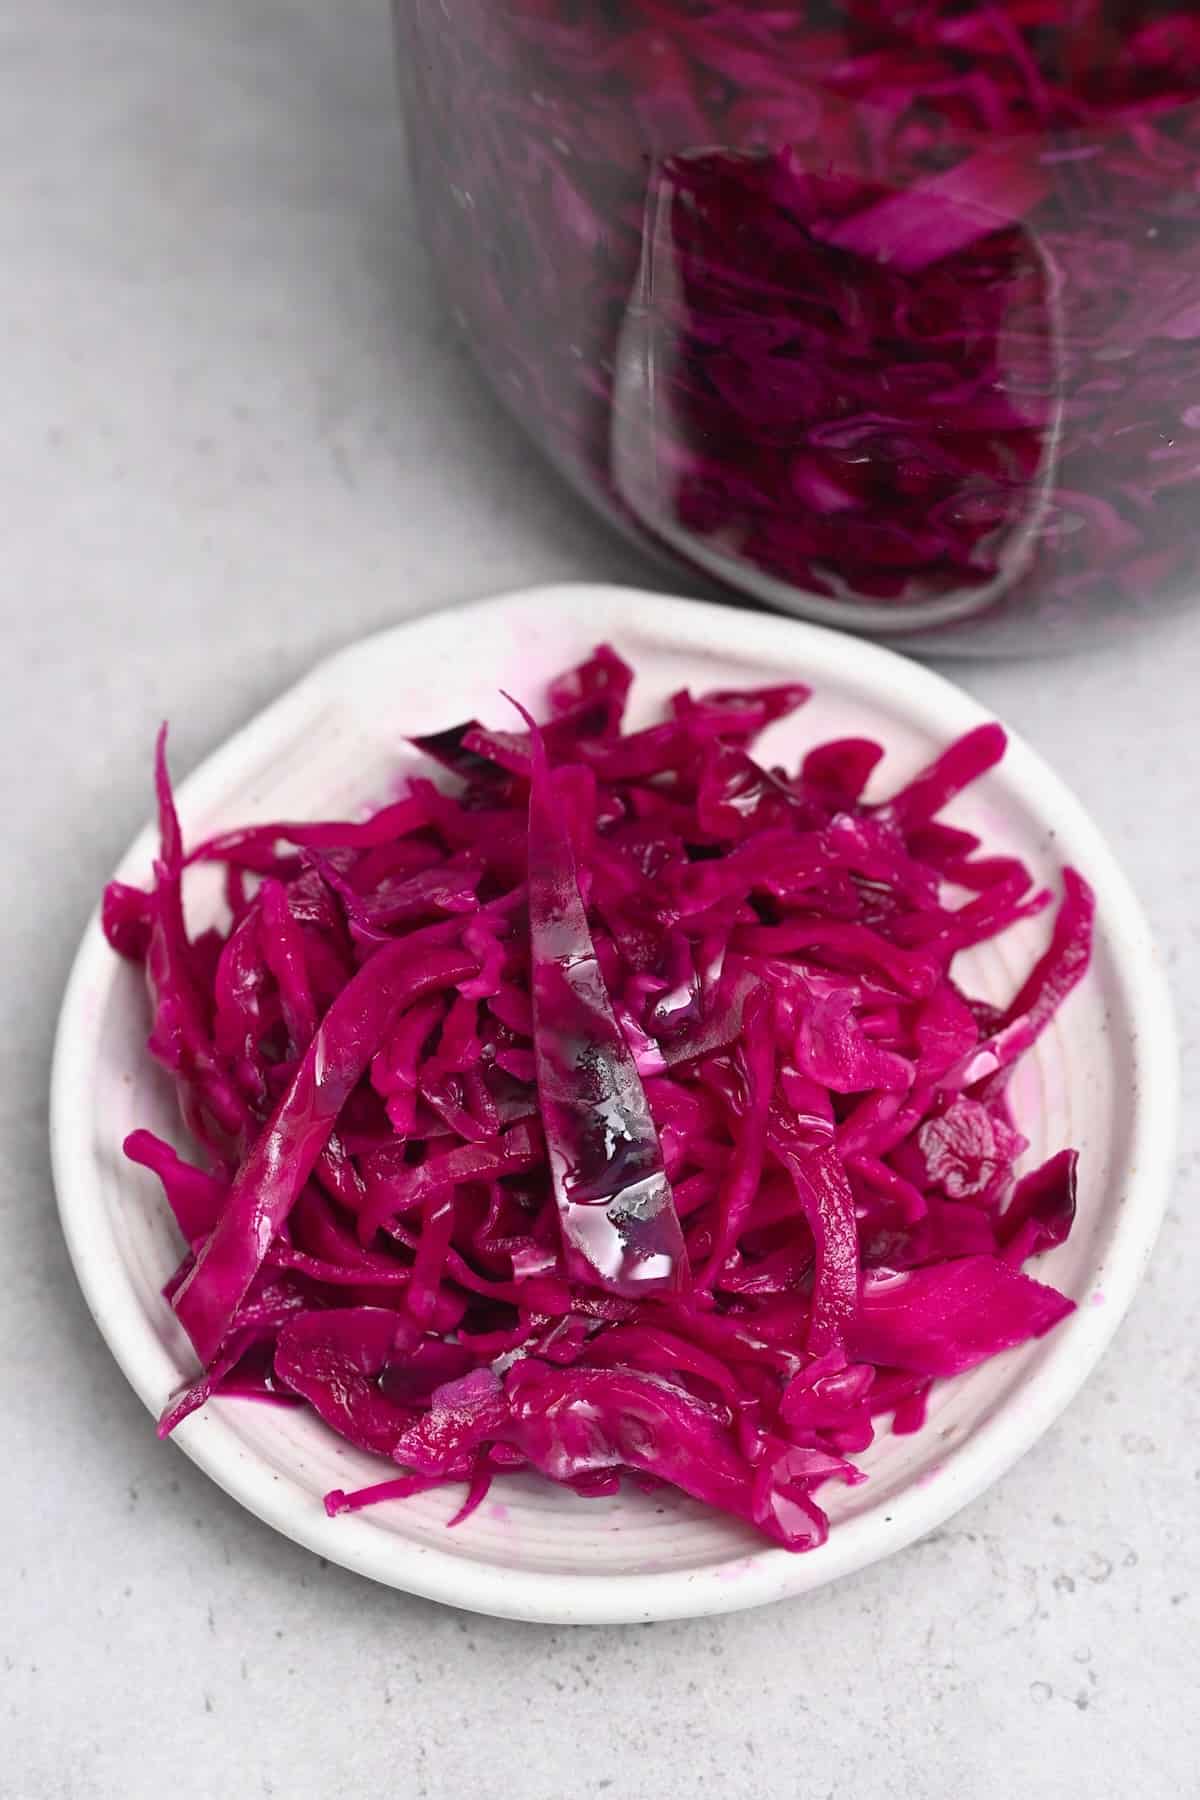 A plate with some homemade pickled red cabbage